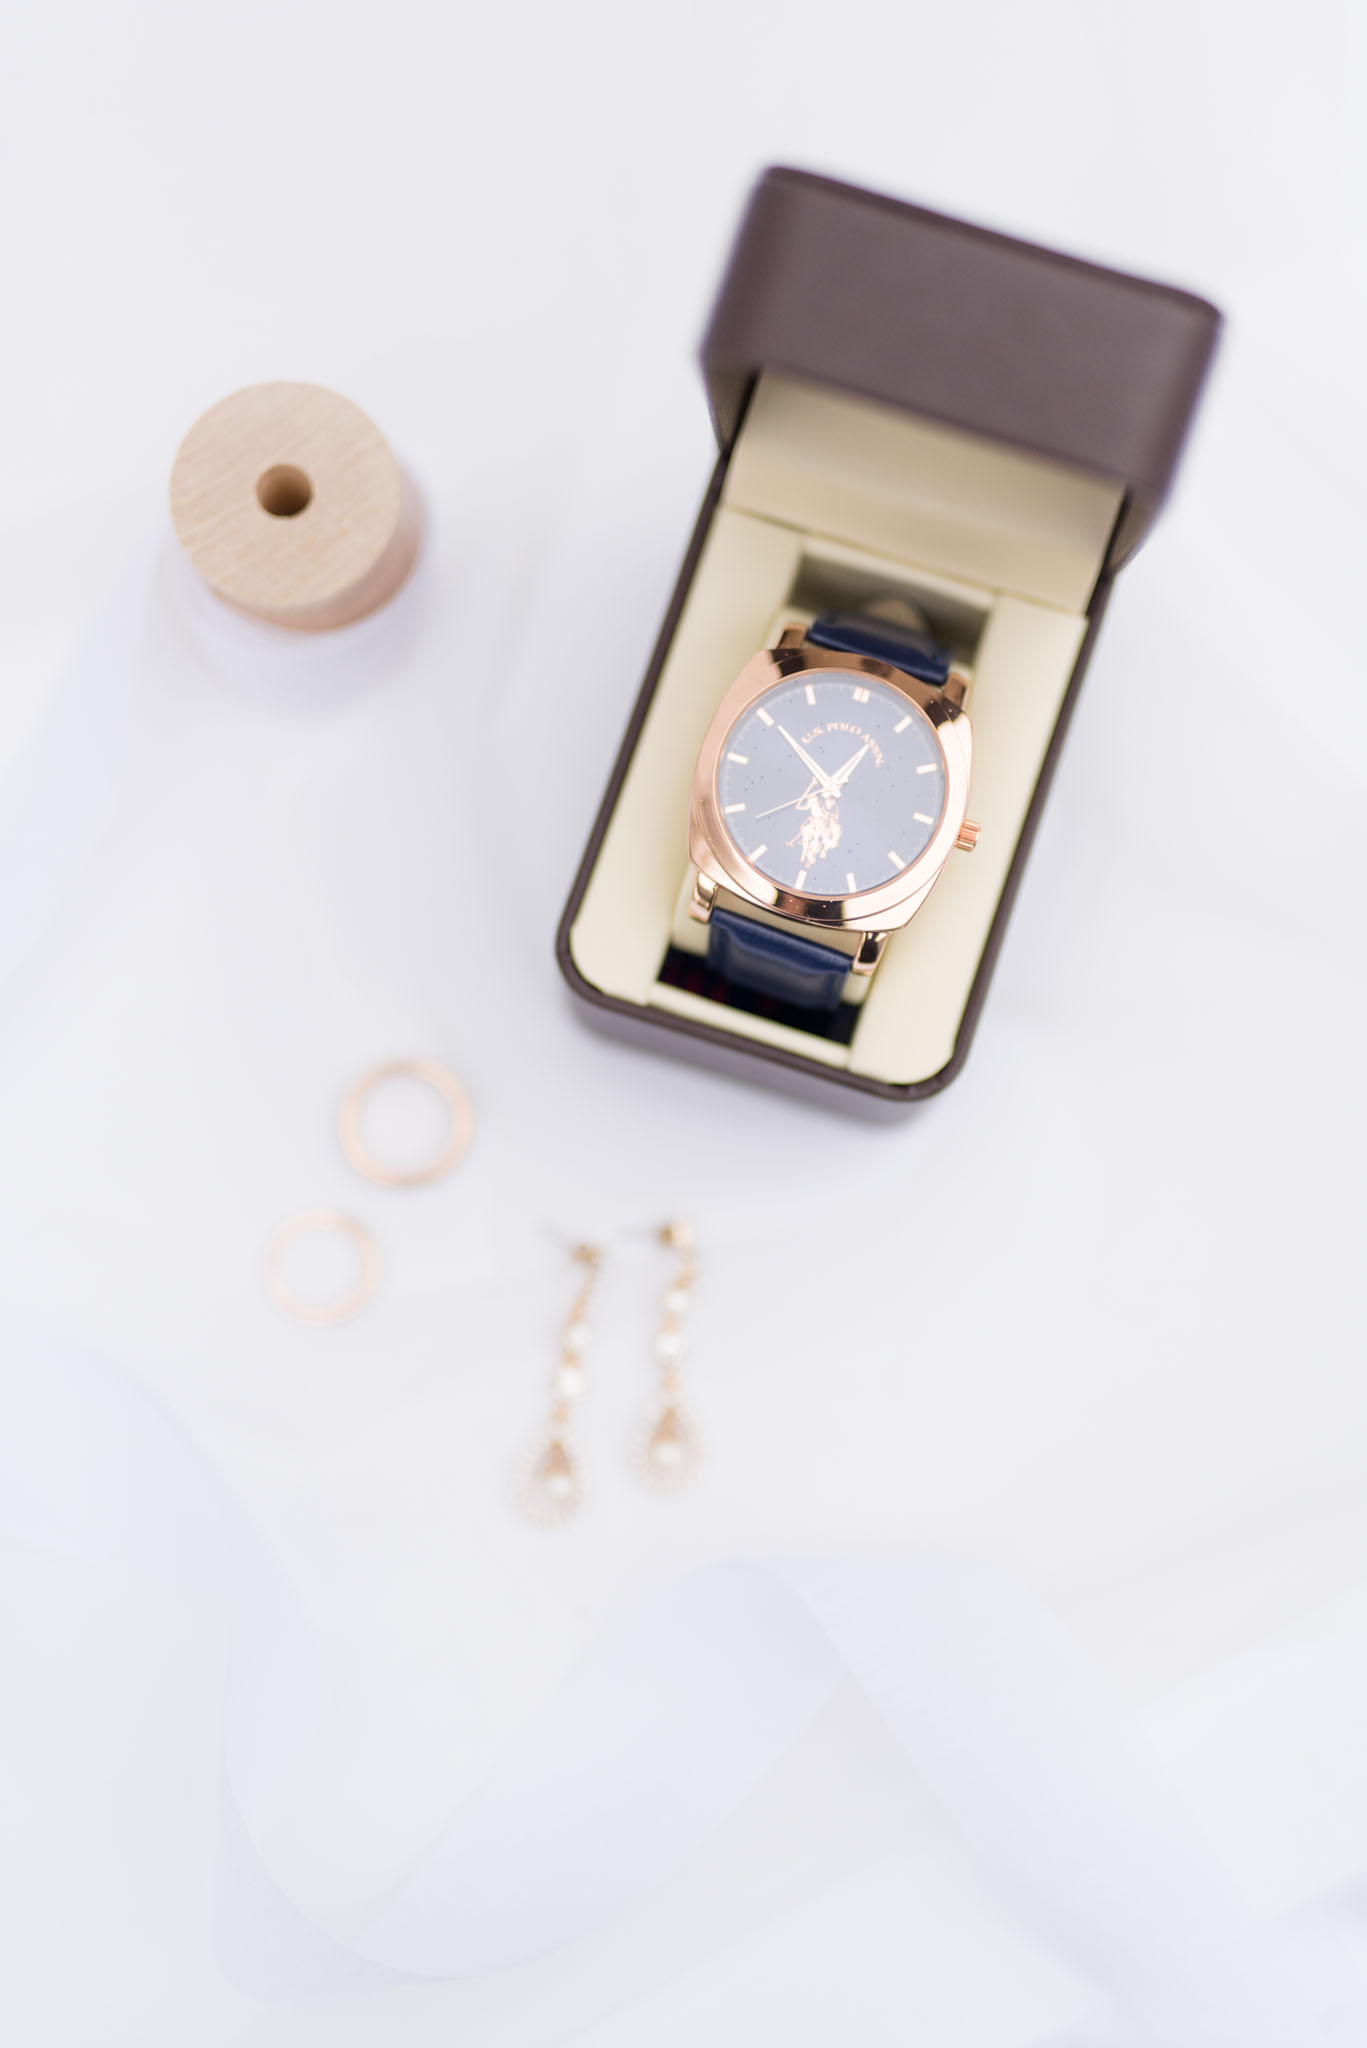 Wedding Details and a Ralph Lauren Polo Watch sit on white fabric.